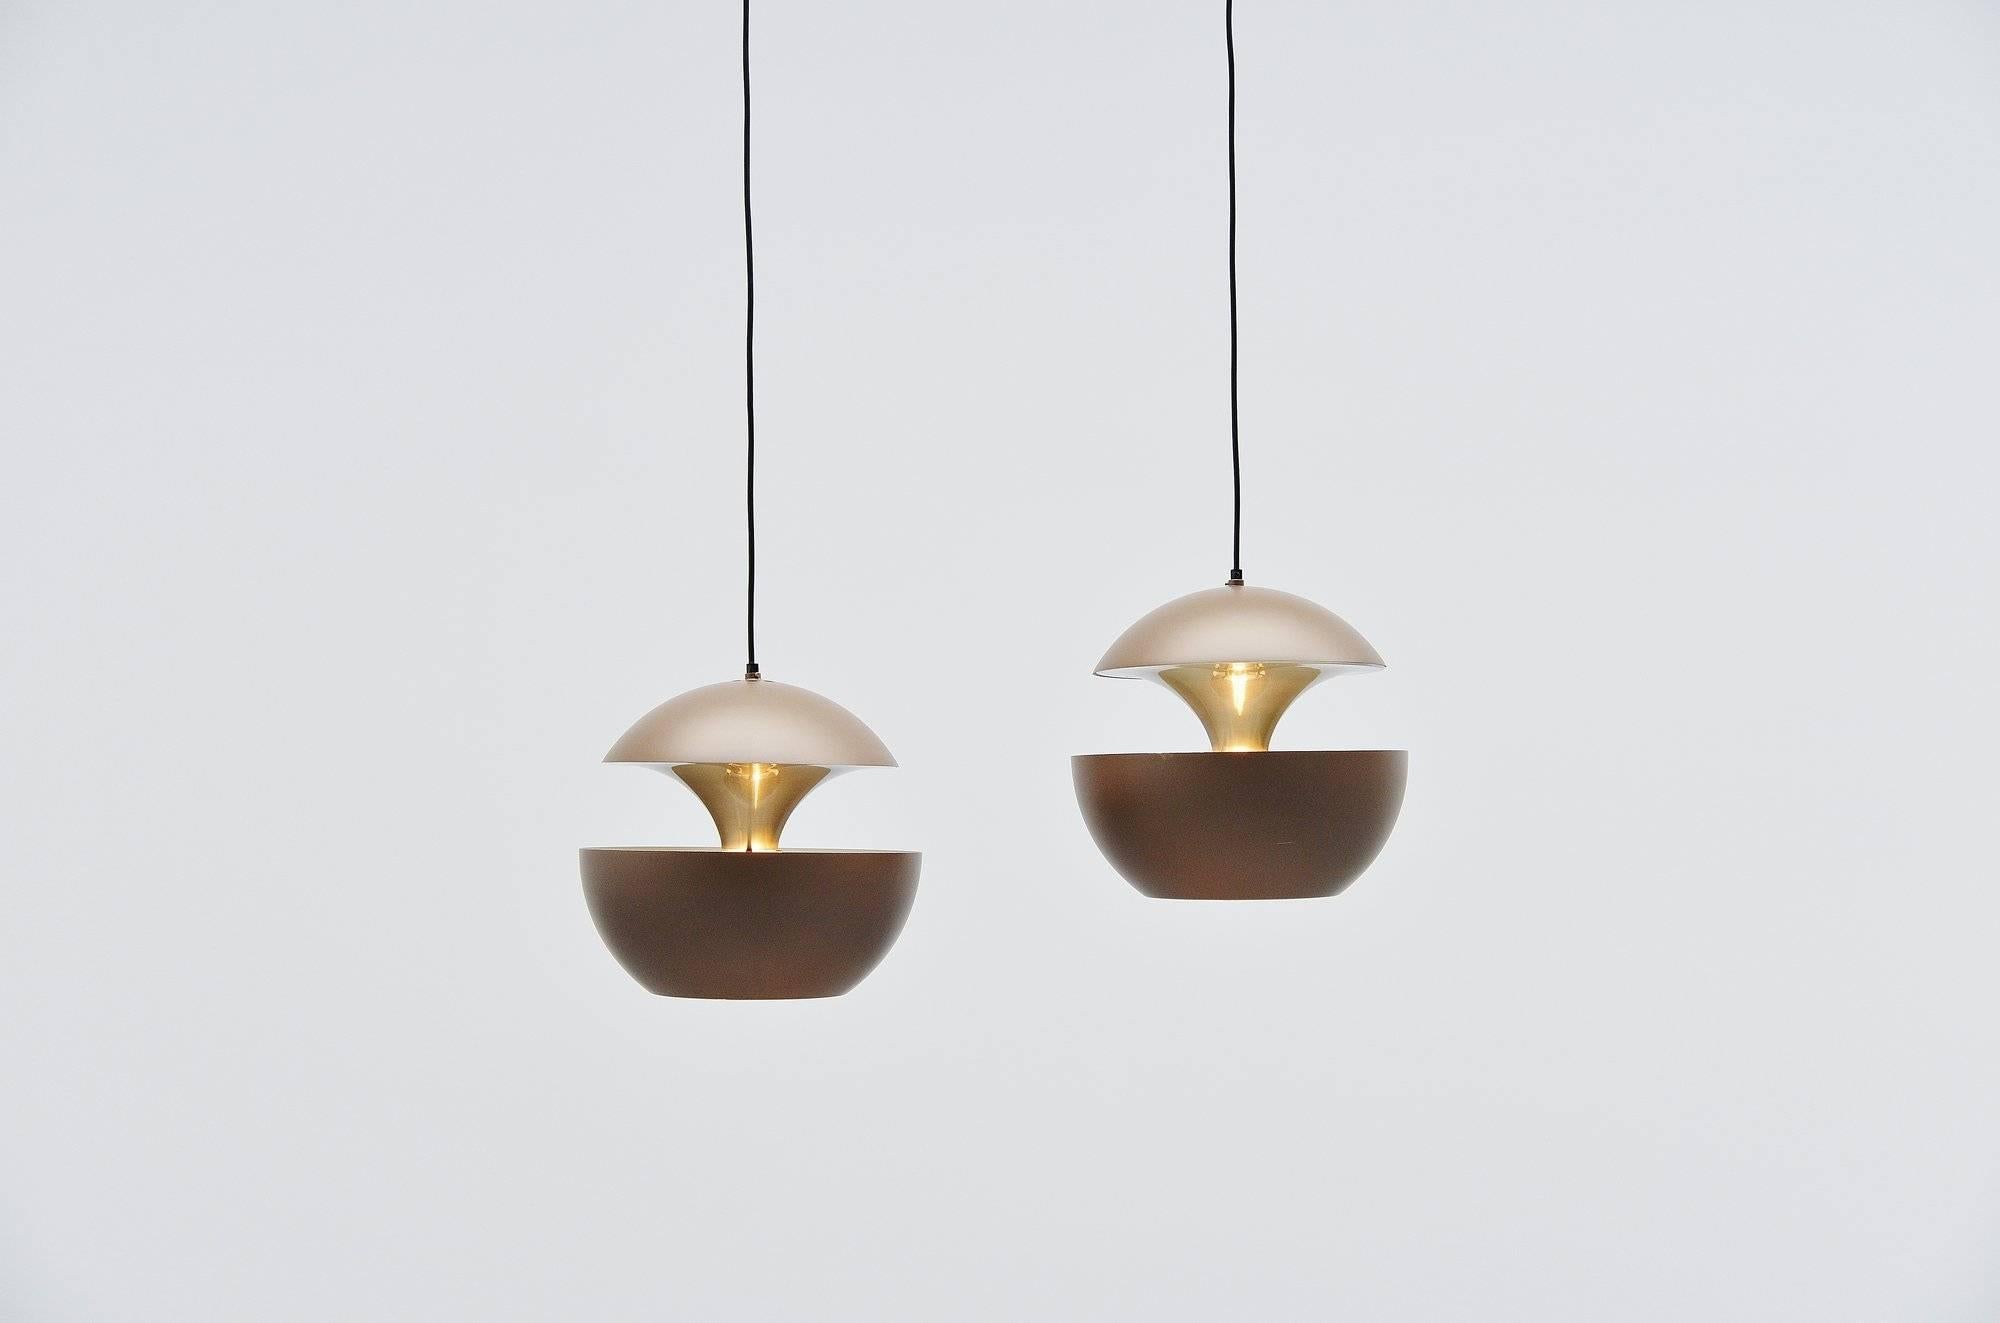 Large set of pendant lamps designed by Bertrand Balas and manufactured by RAAK Amsterdam, Holland 1970. These lamps are also called 'Springfontein' in Dutch, or fontaine jaillissante. The lamps have a brown painted shade and gold anodized inside for